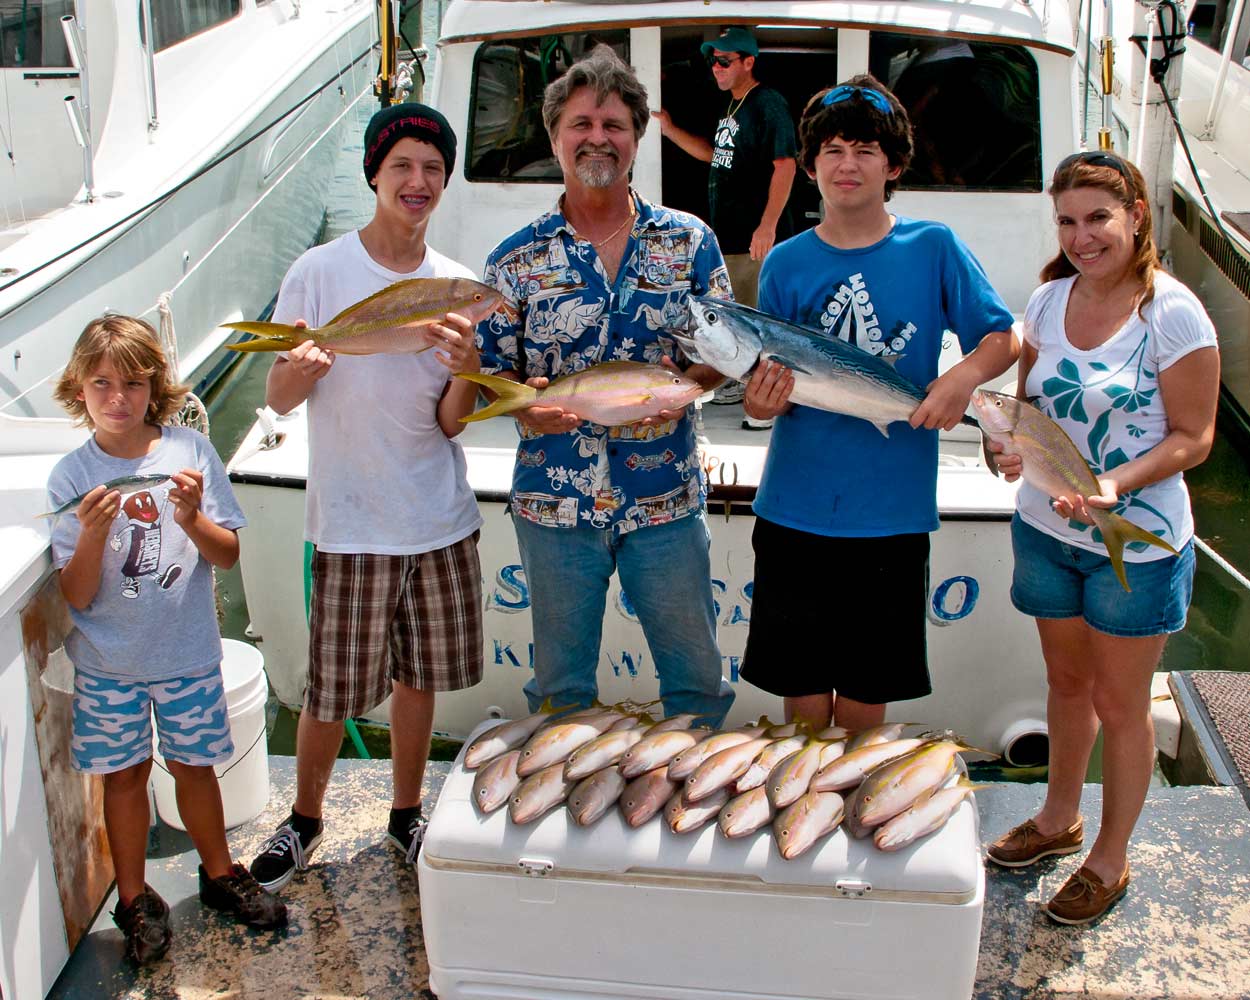 "The most fish we have ever caught" is what they had to say about this trip.